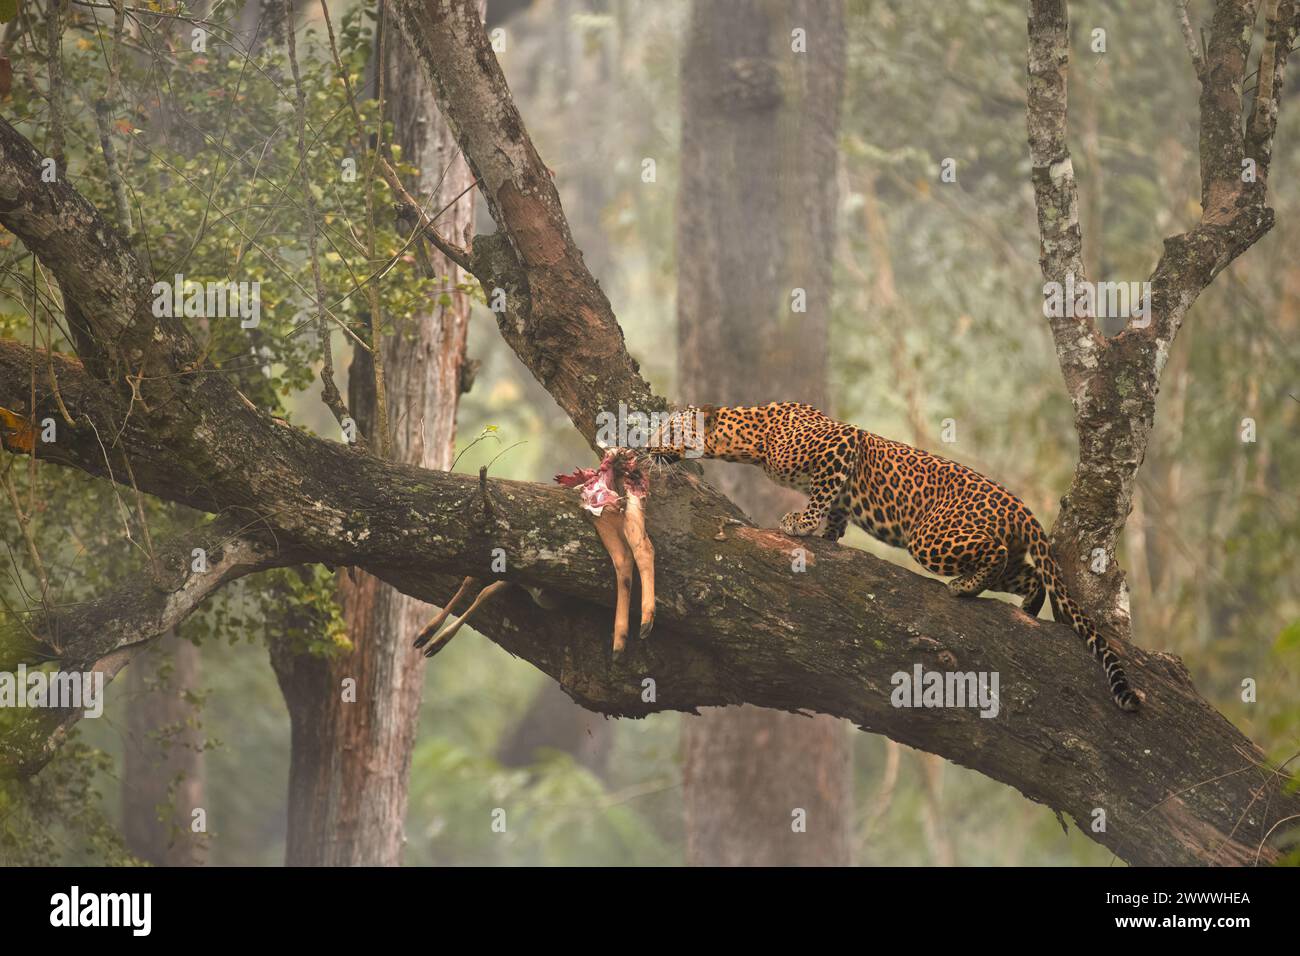 Indian leopard, Panthera pardus fusca, on a slanted tree branch approaches its prey hung in the tree, with a dense Kabini forest backdrop, India. Stock Photo